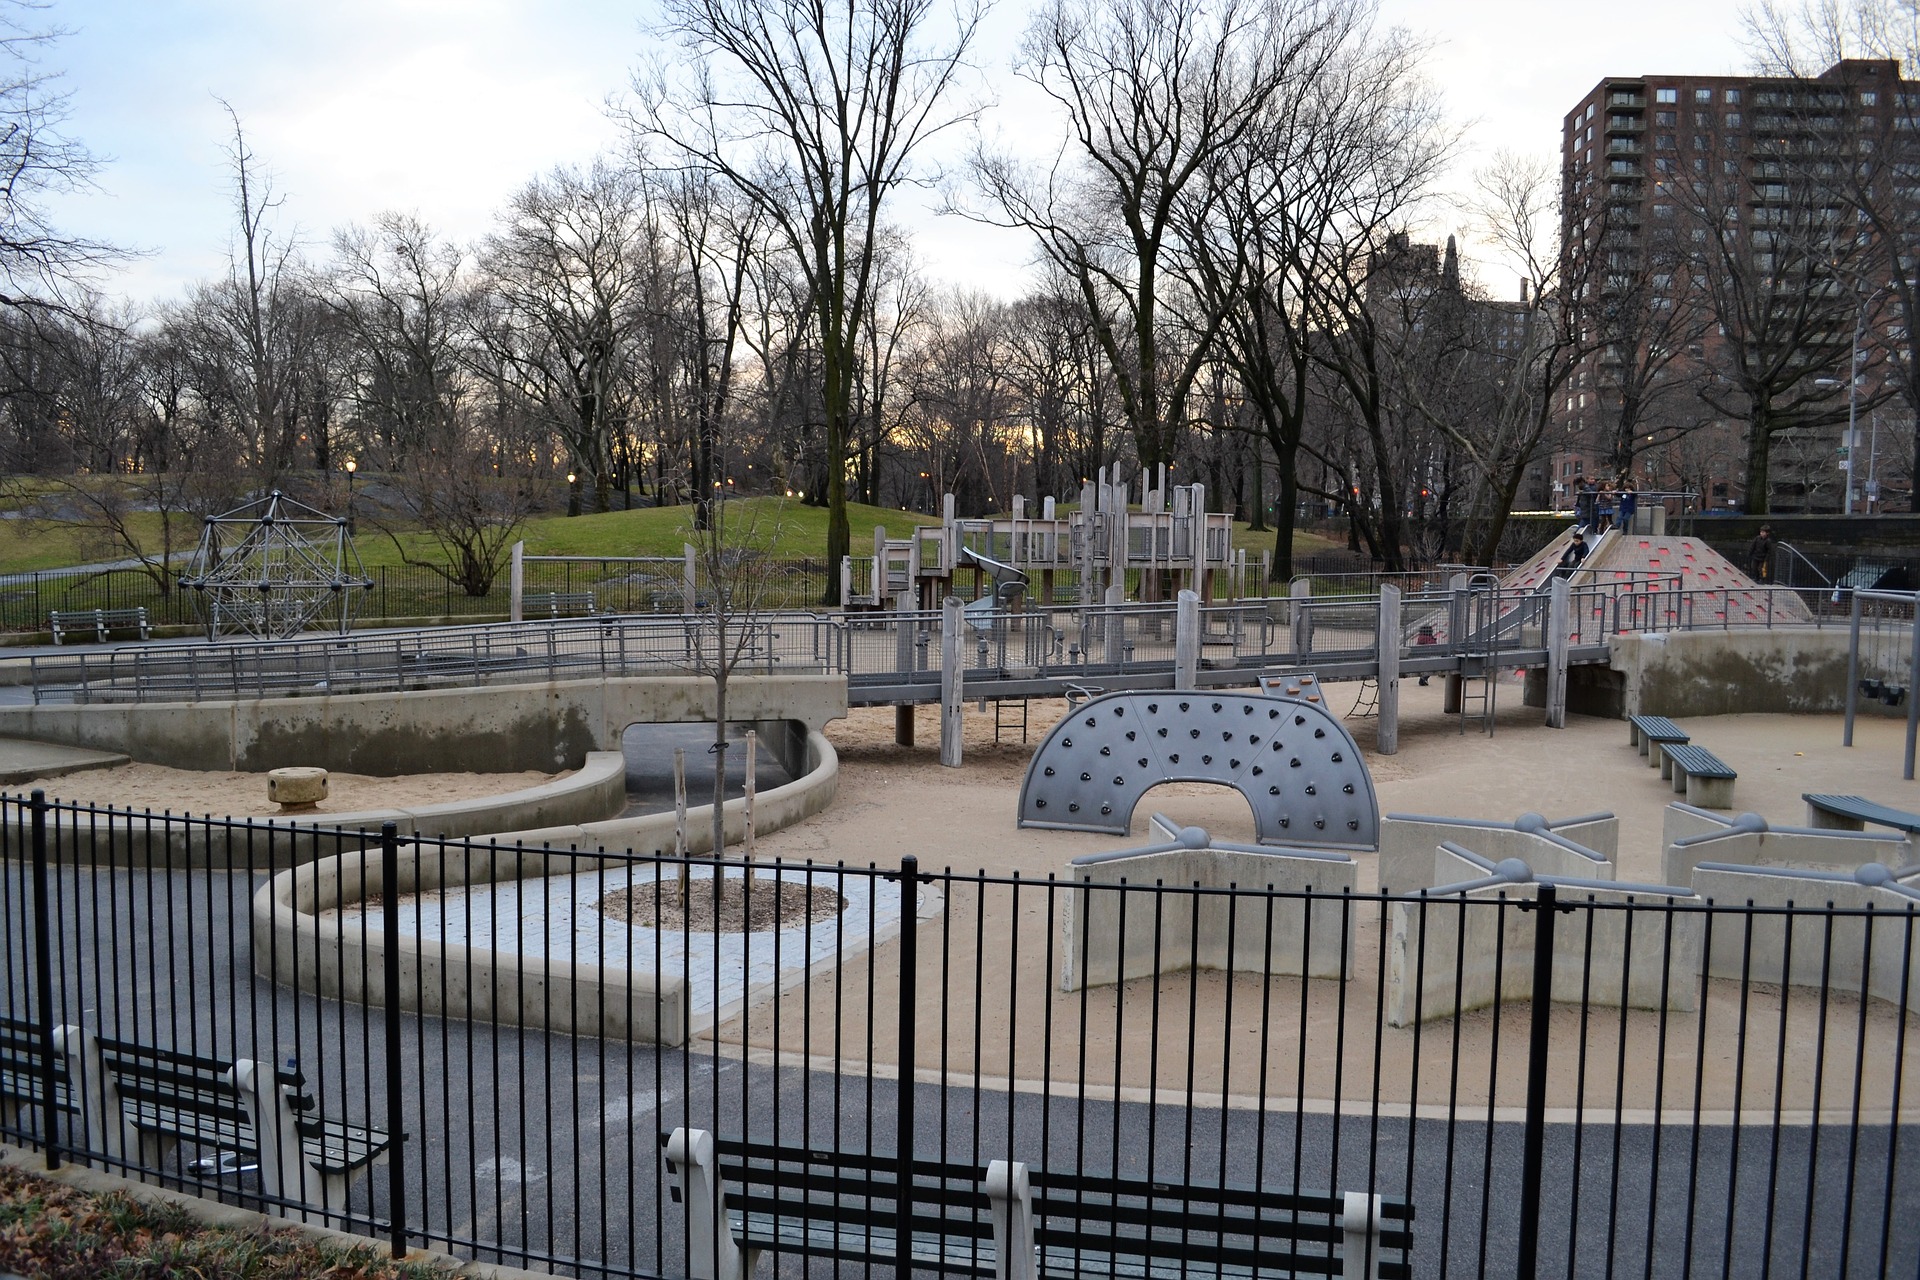 All NYC playgrounds will now be closed